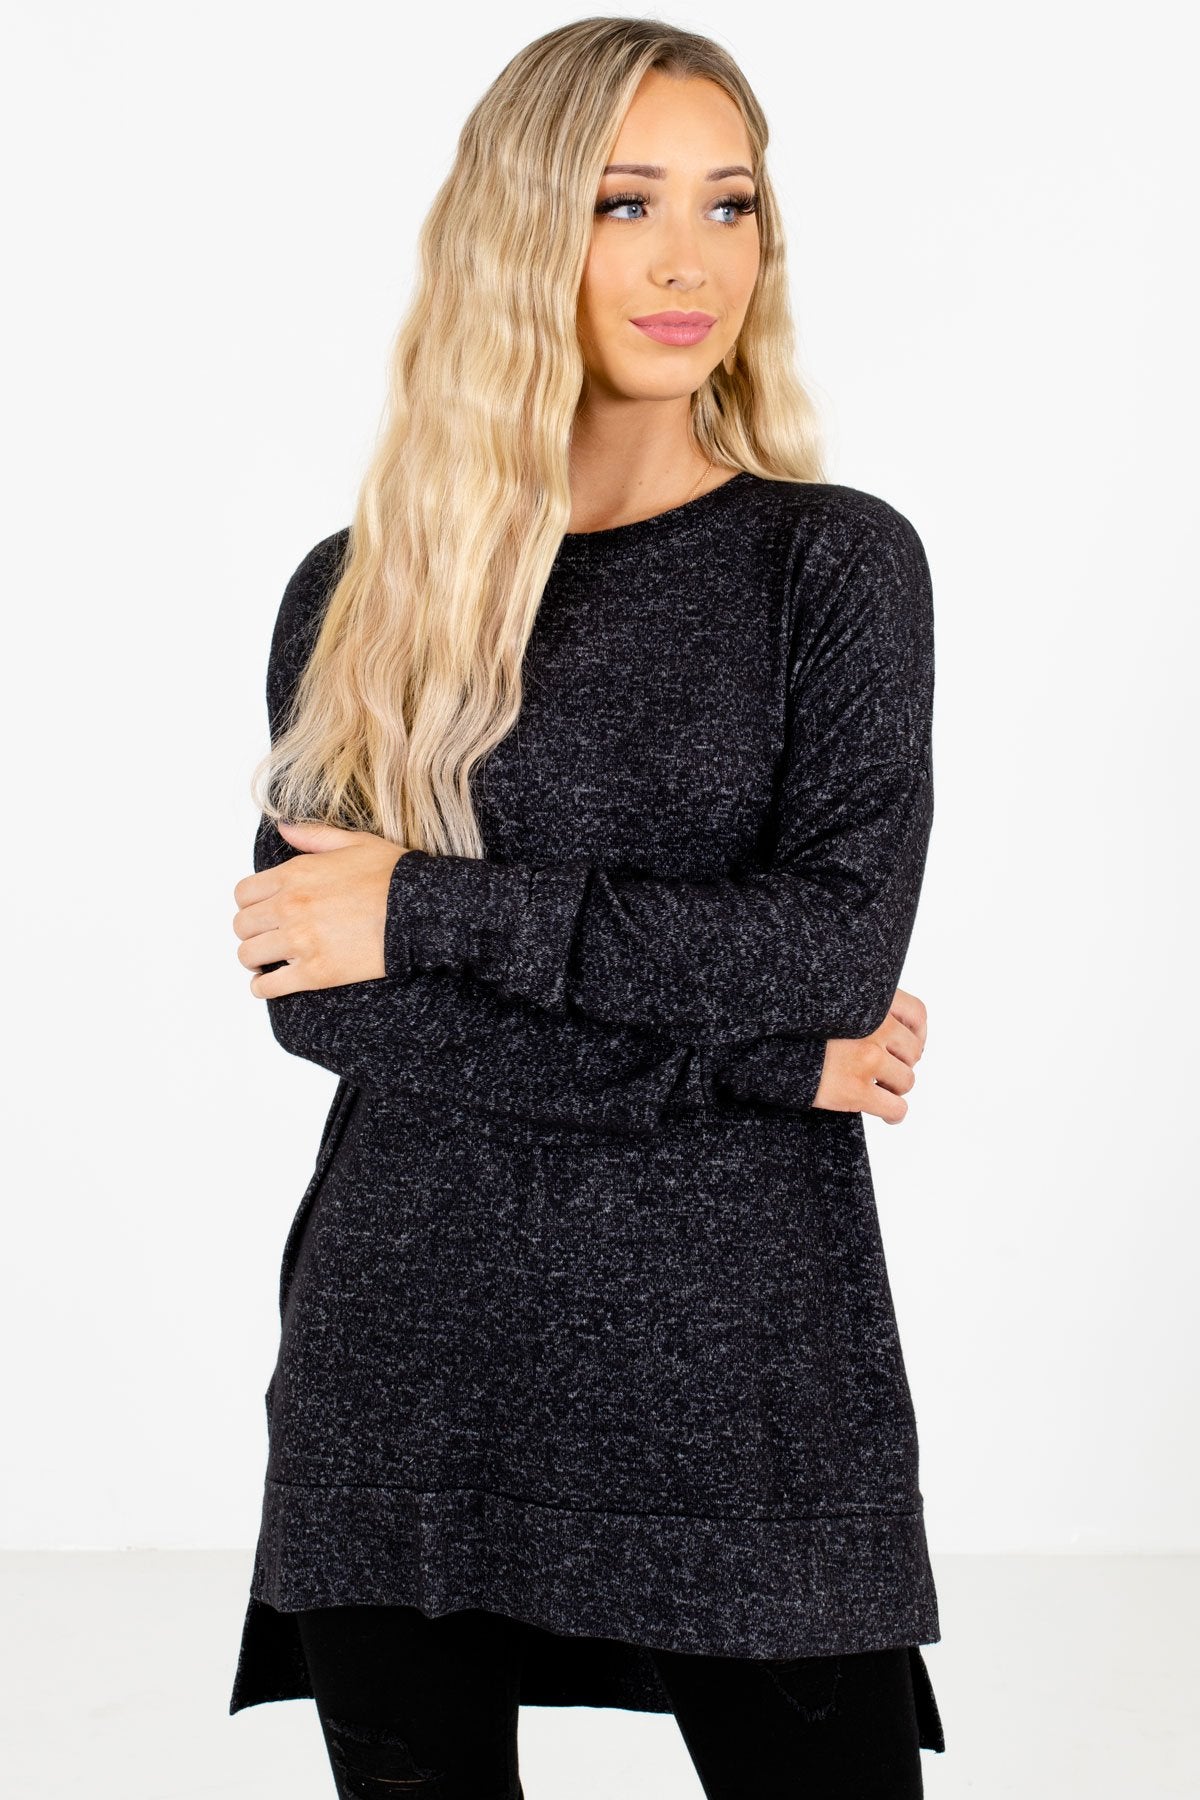 Women’s Charcoal Gray Warm and Cozy Boutique Clothing